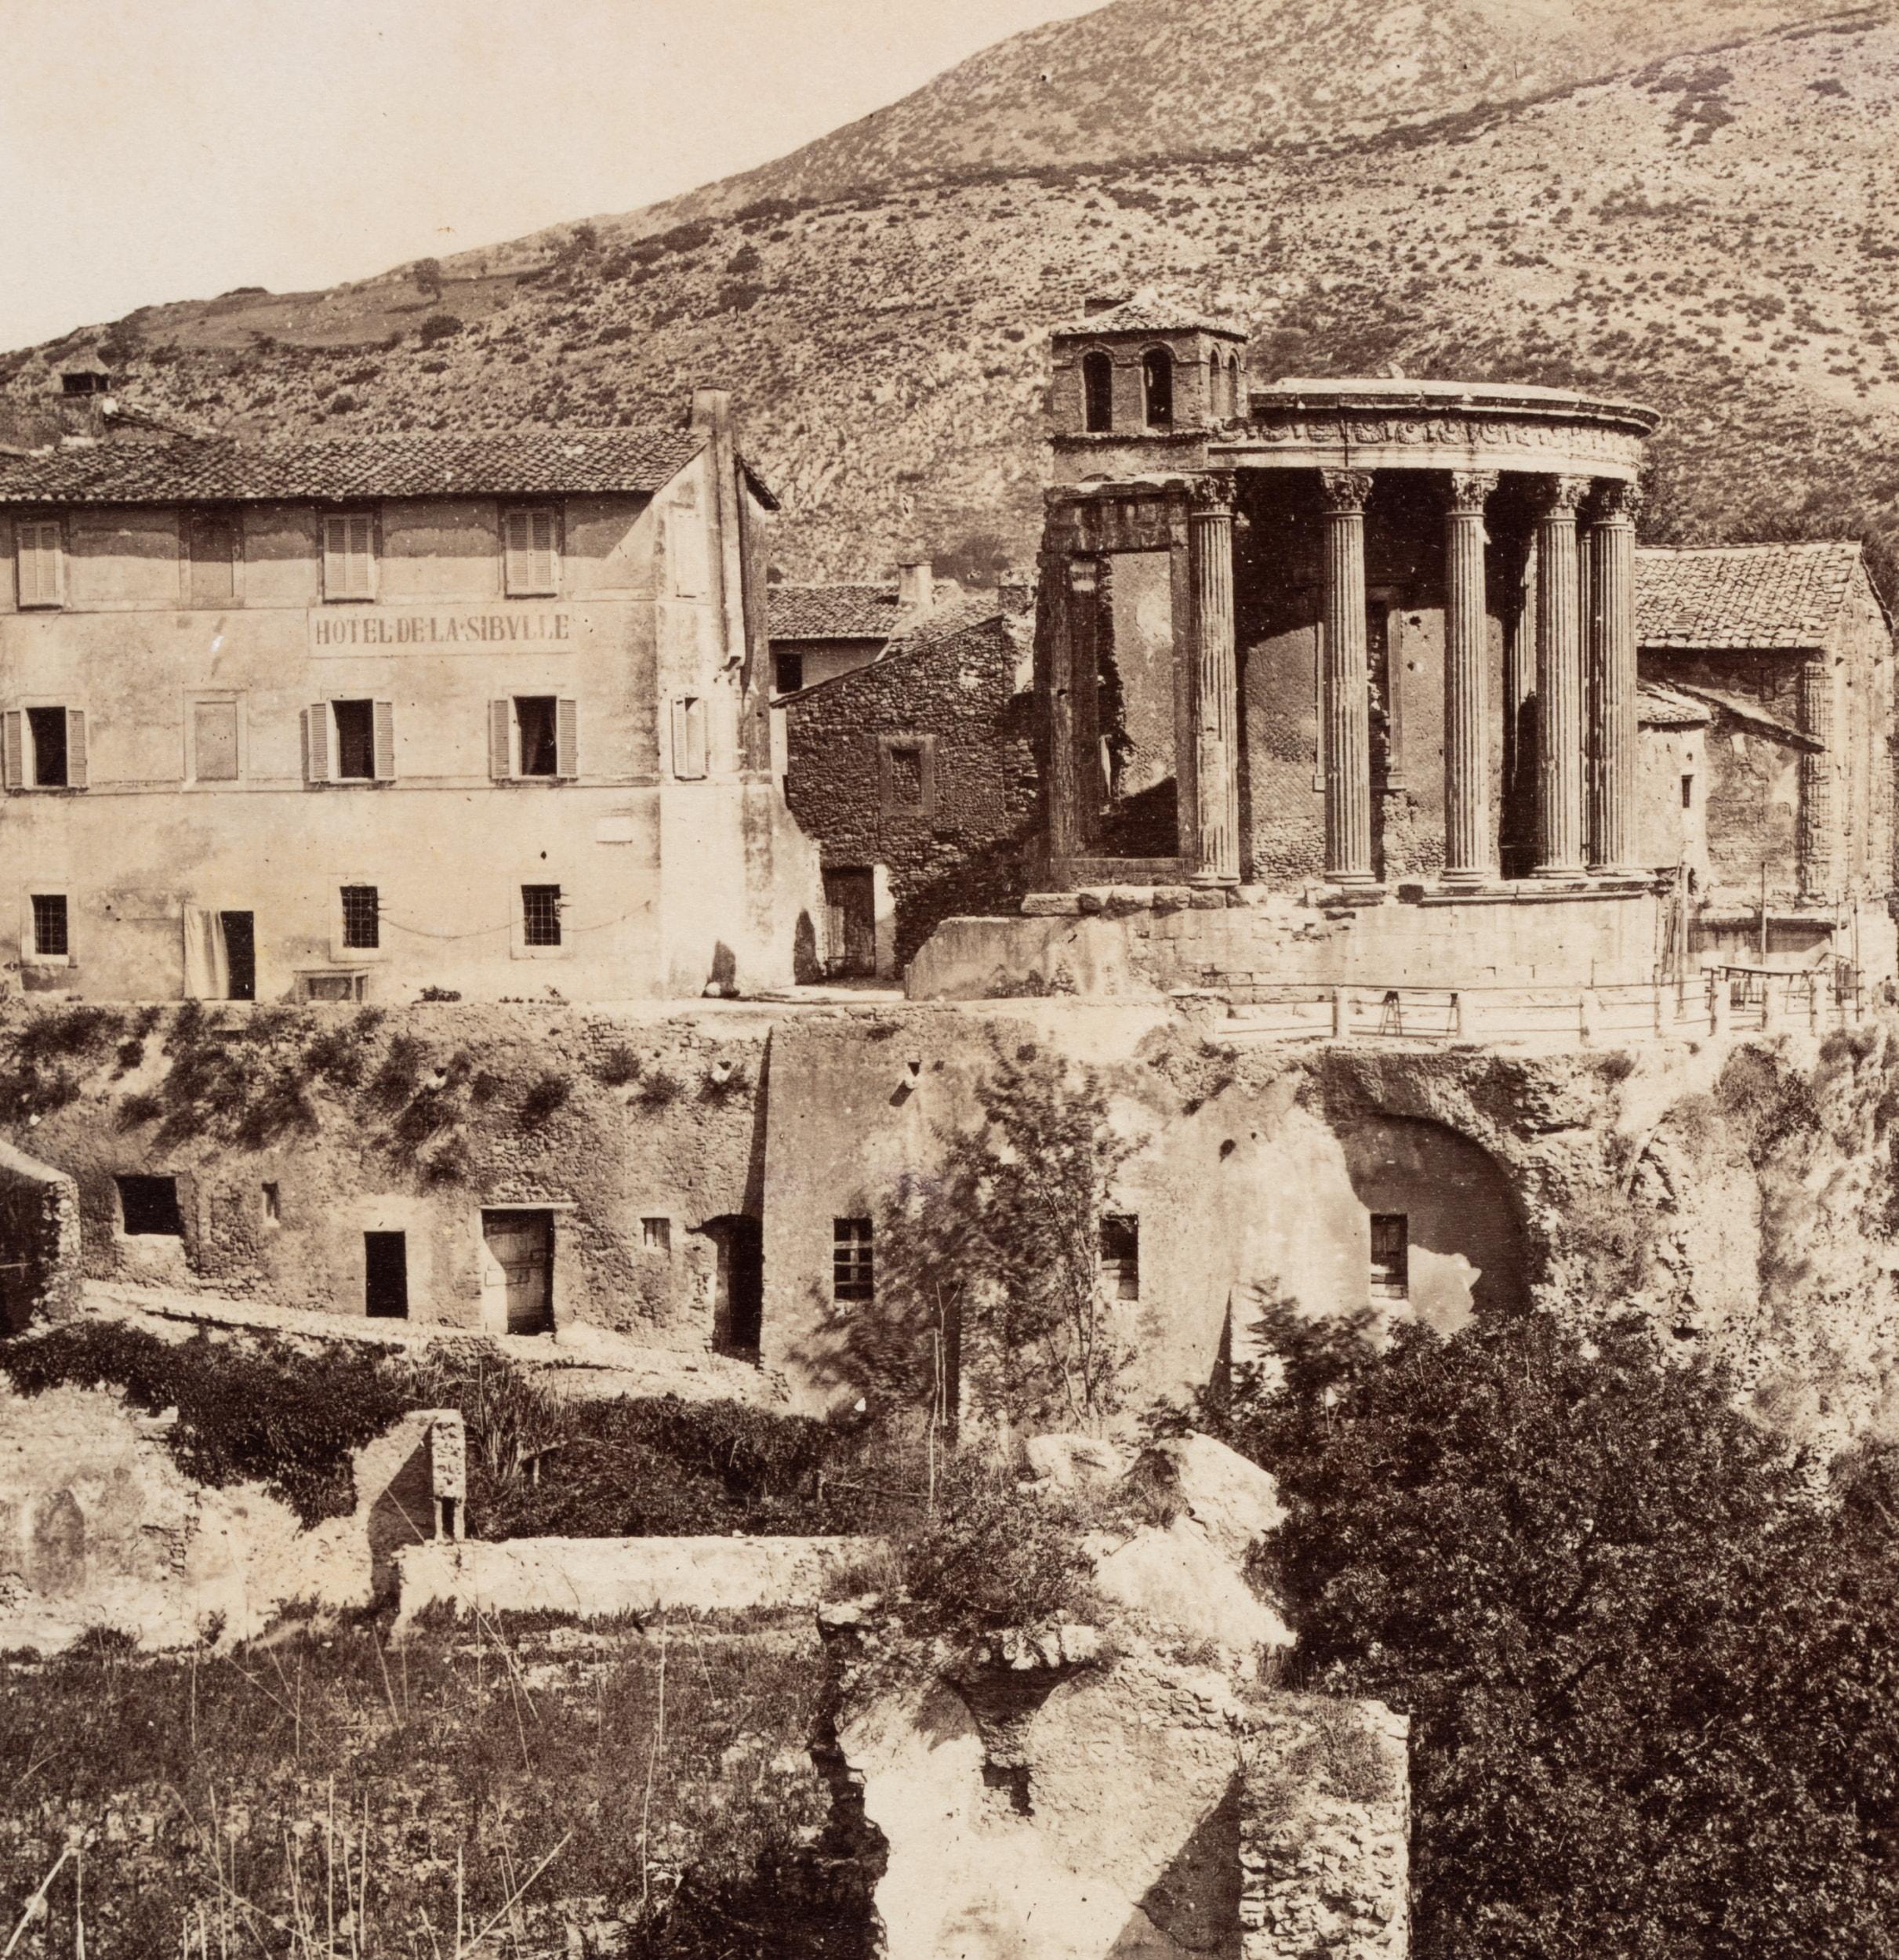 Fratelli Alinari (19th century) Circle: Tivoli View of the Temple of Vesta and Sibyl in hilly Mediterranean landscape, c. 1880, albumen paper print

Technique: albumen paper print

Inscription: Lower middle inscribed in the printing plate: 